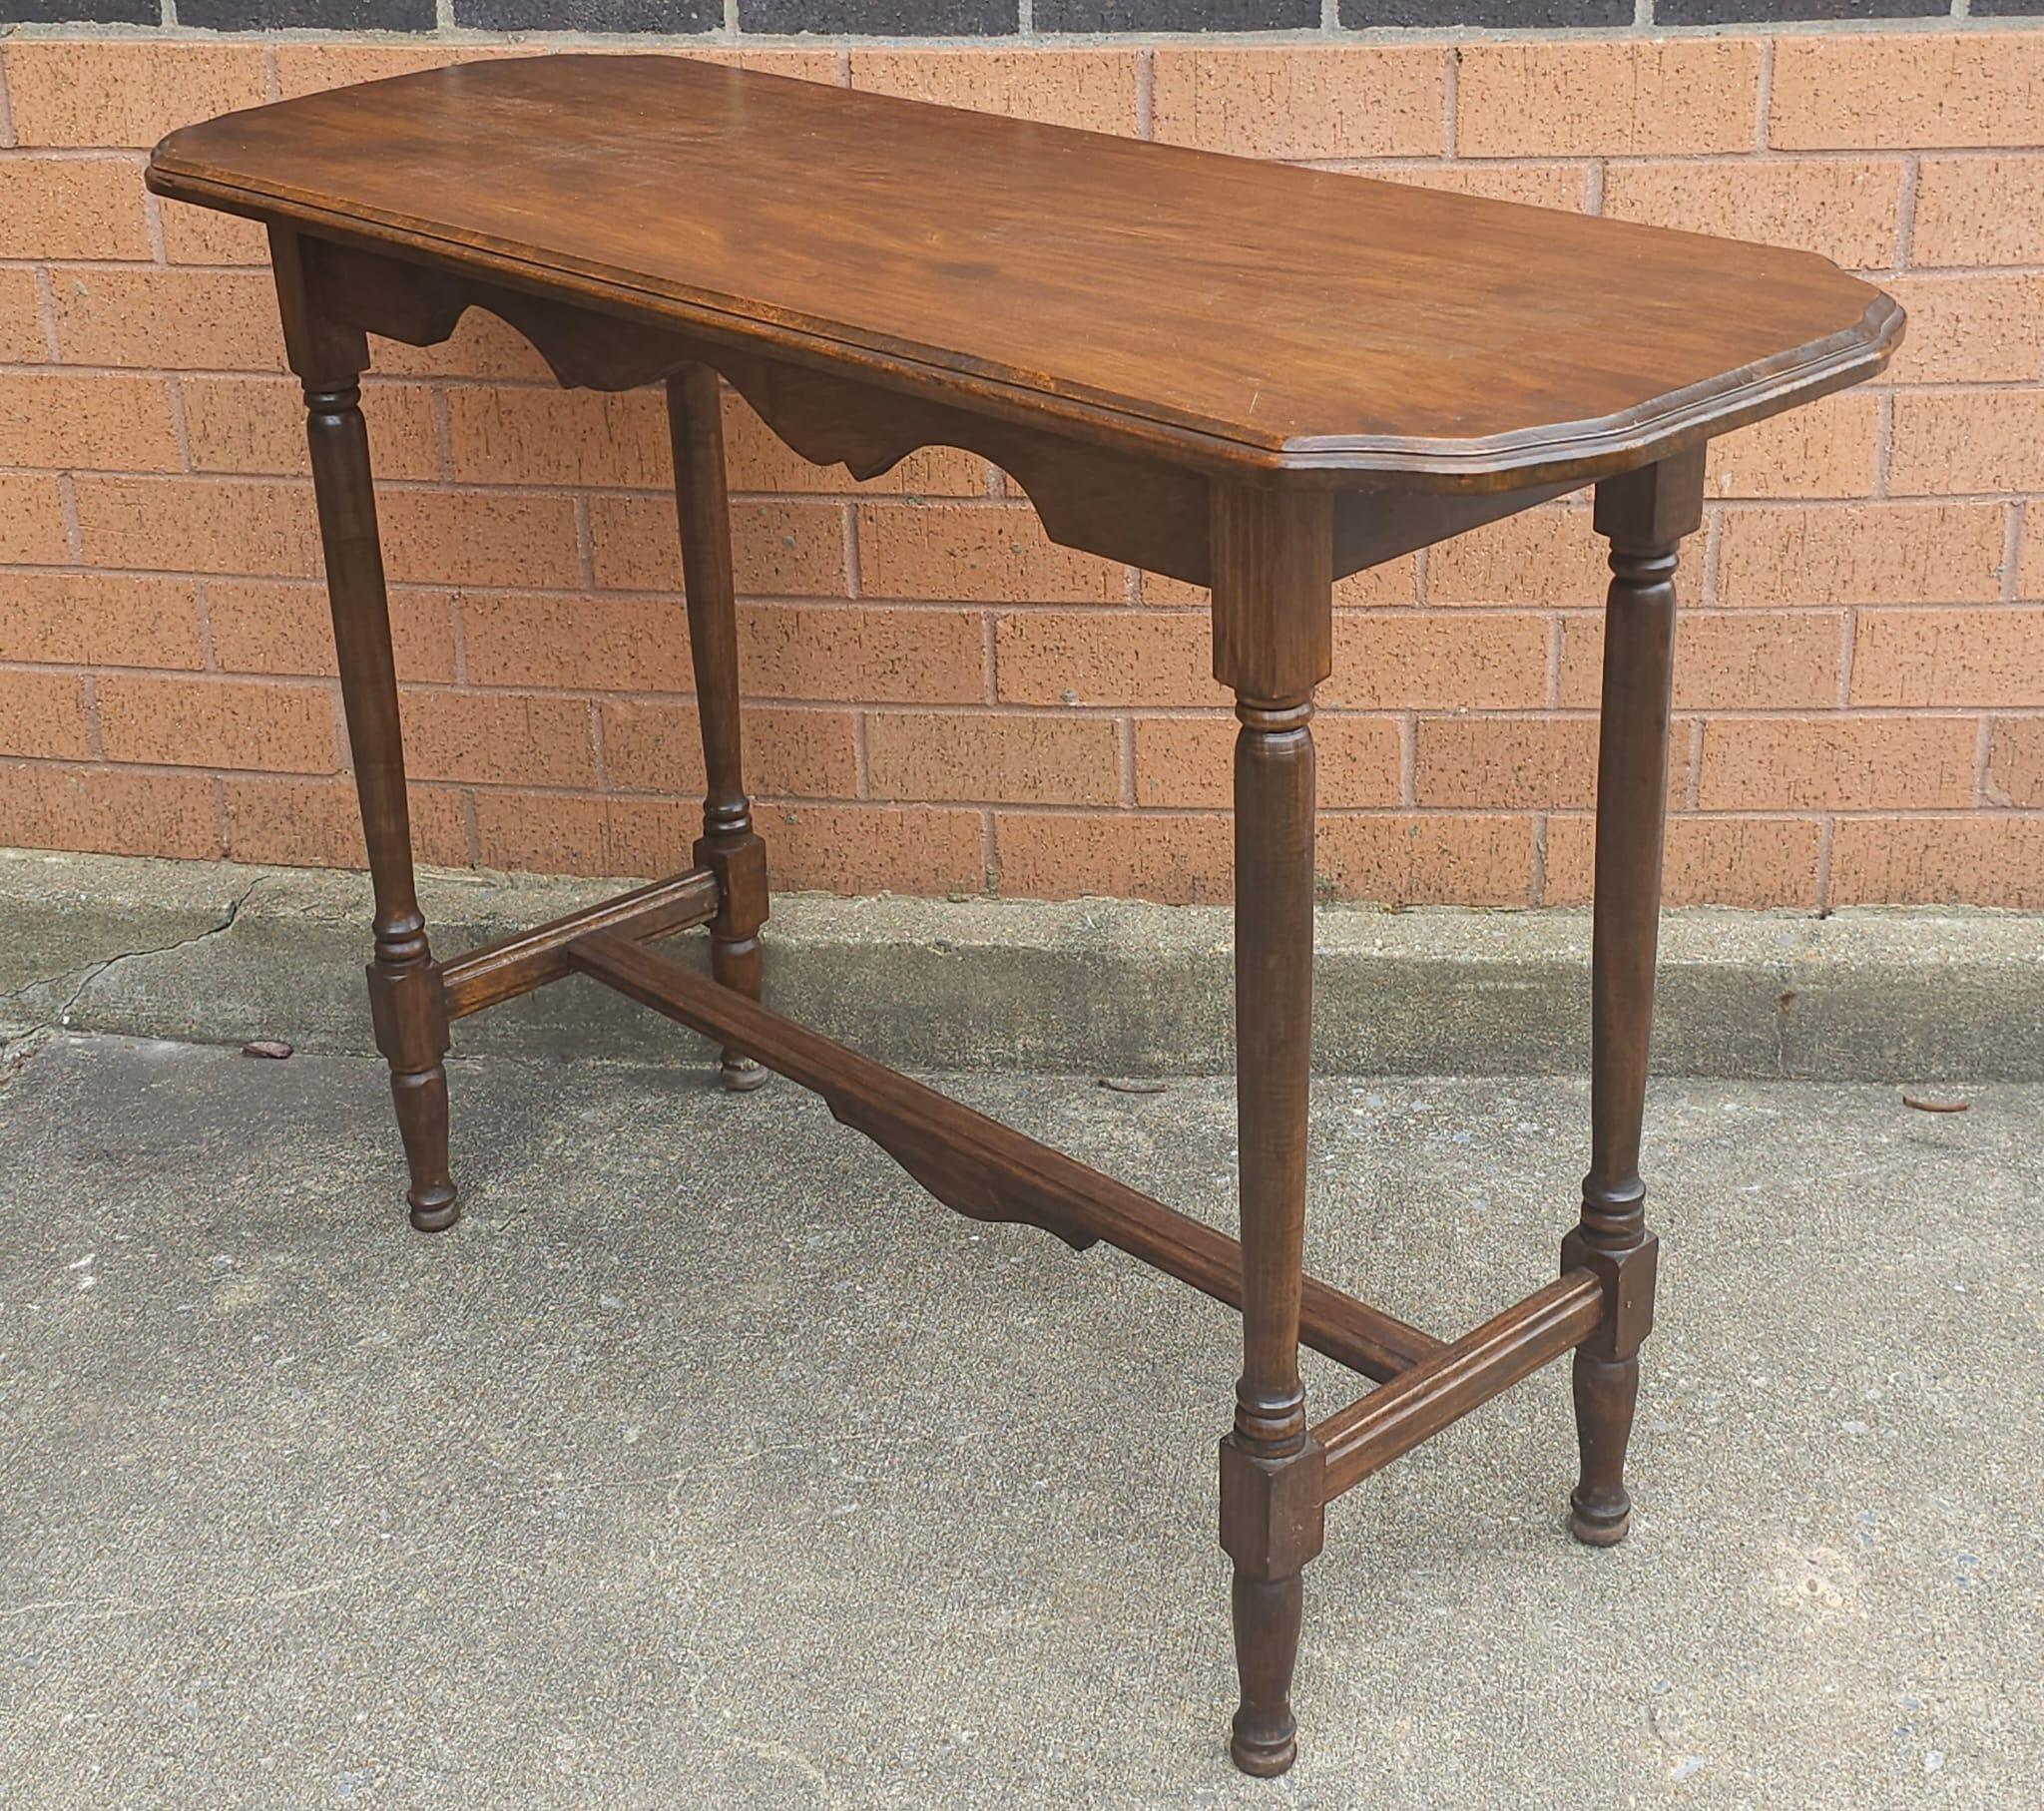 An Early 20th Century Victorian Mahogany Trestle Console Table. Measures 42.5